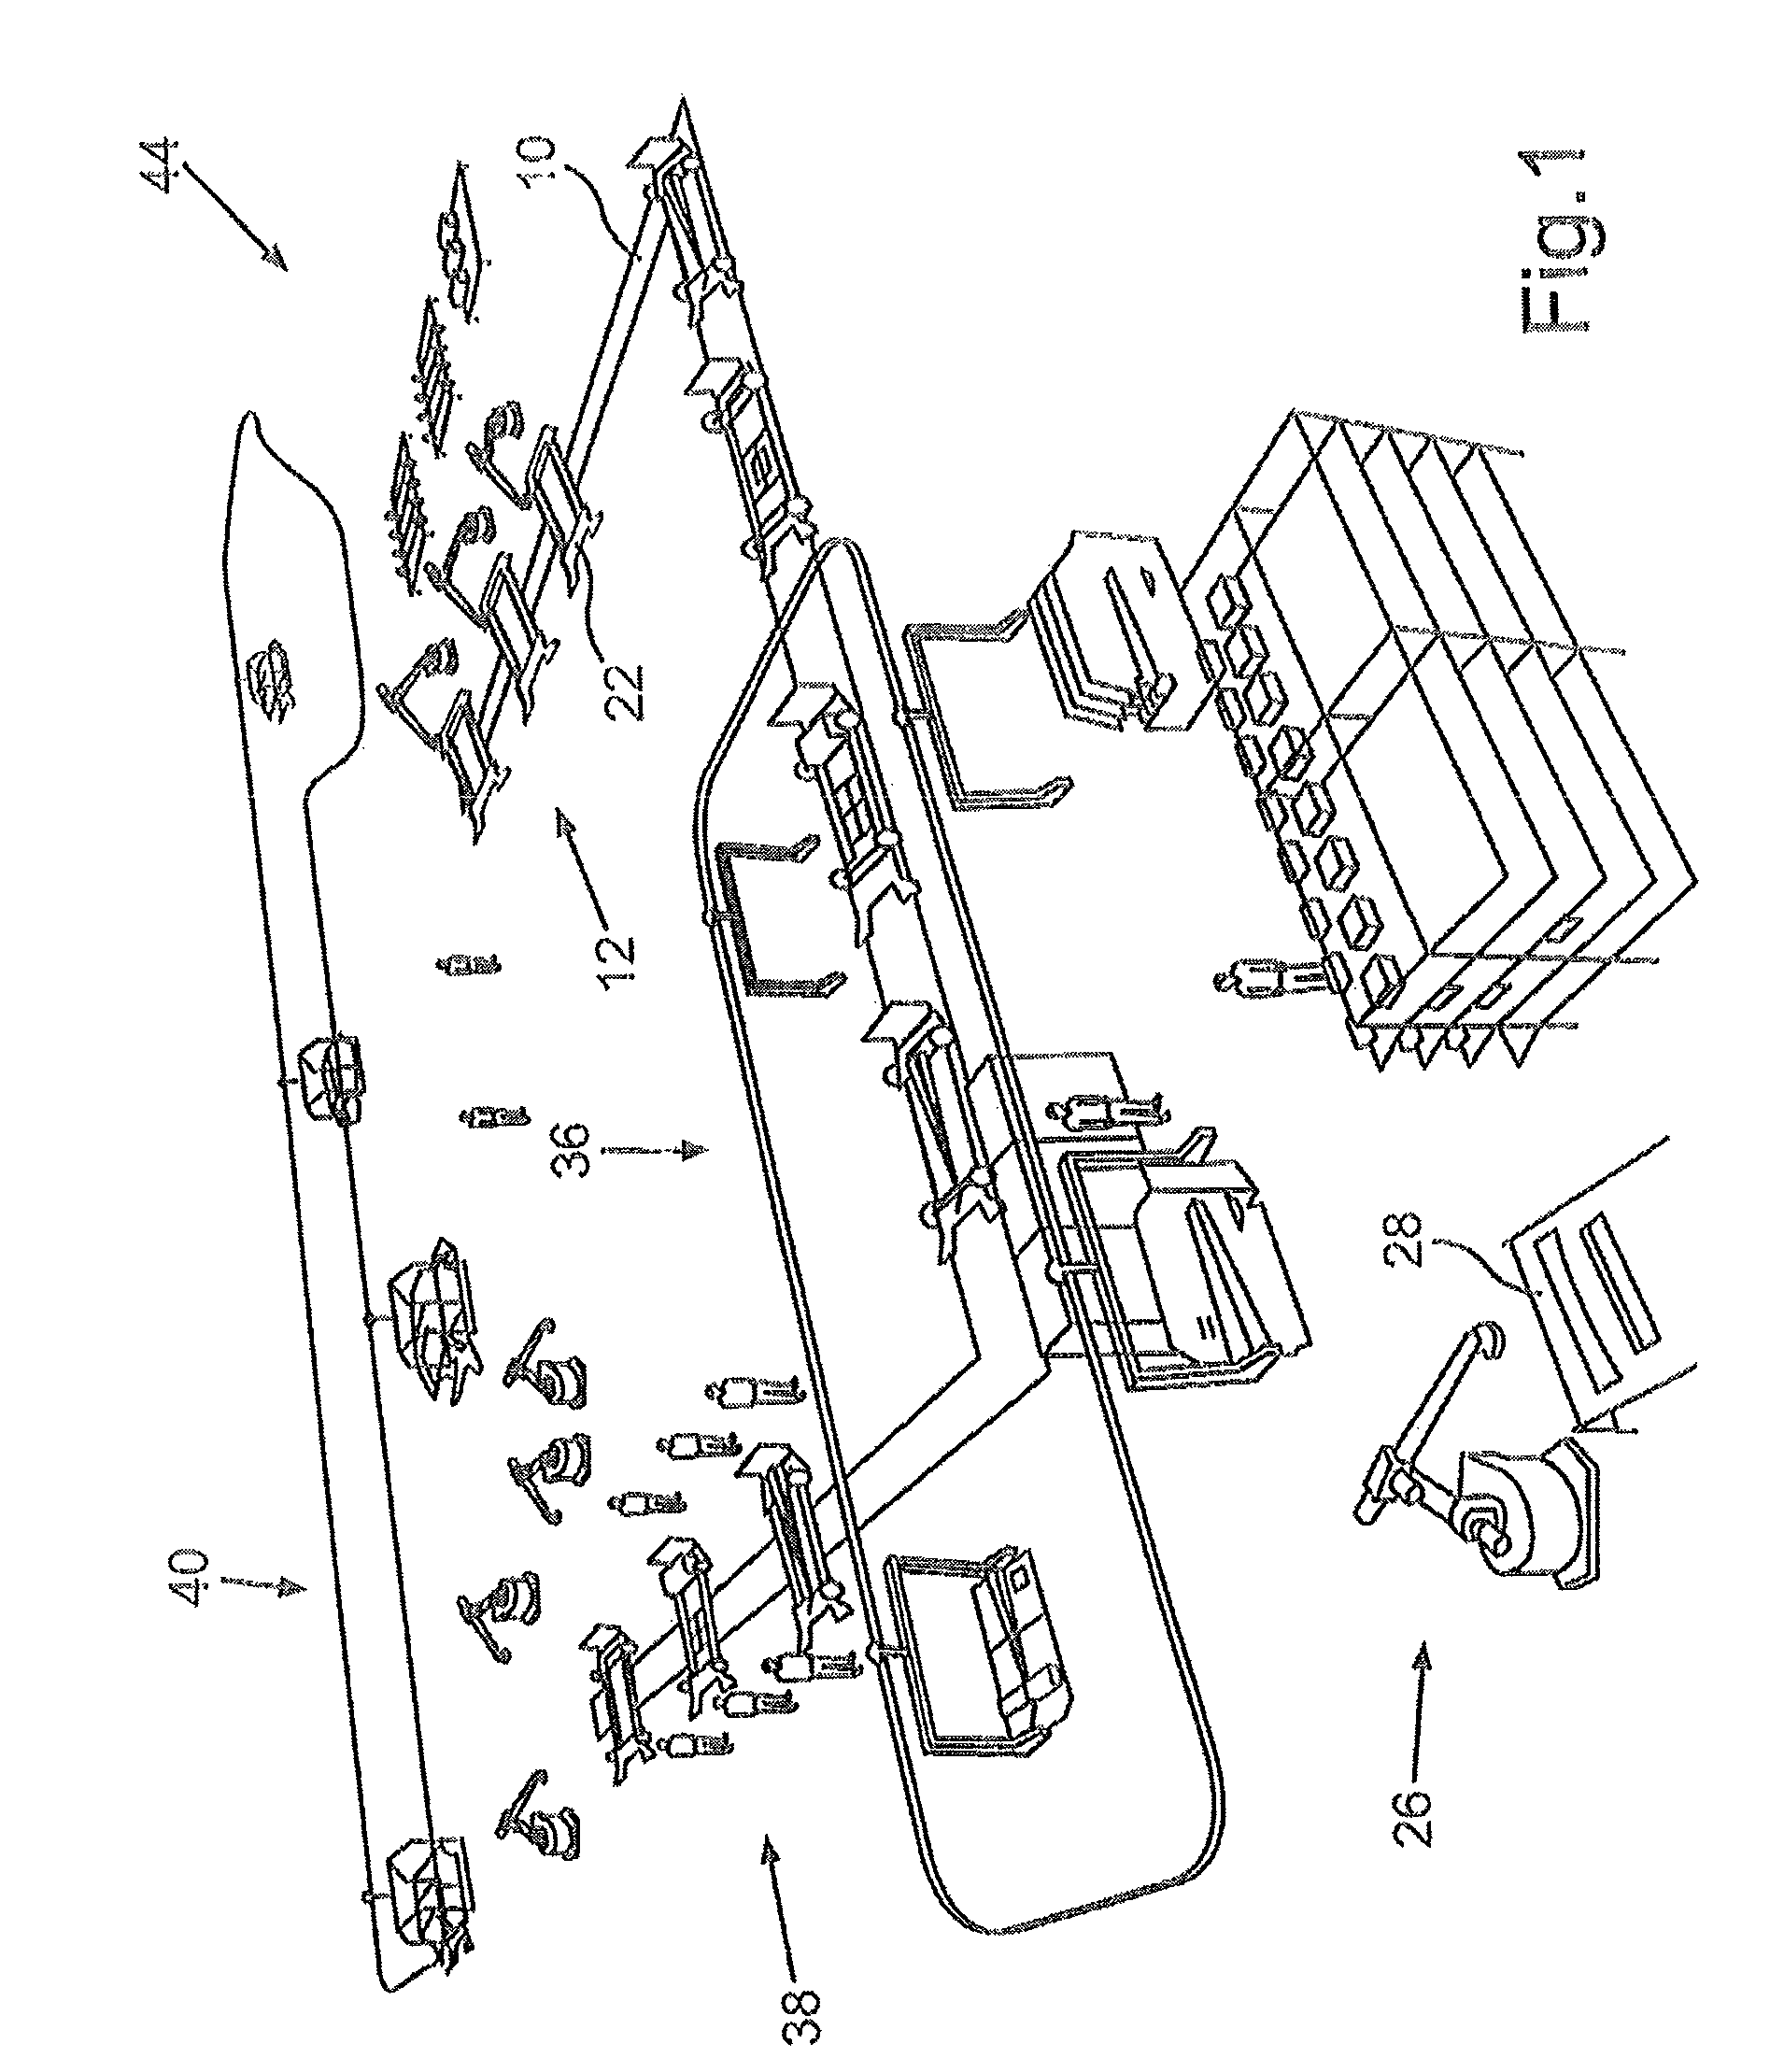 Method for fitting motor vehicle suspension systems